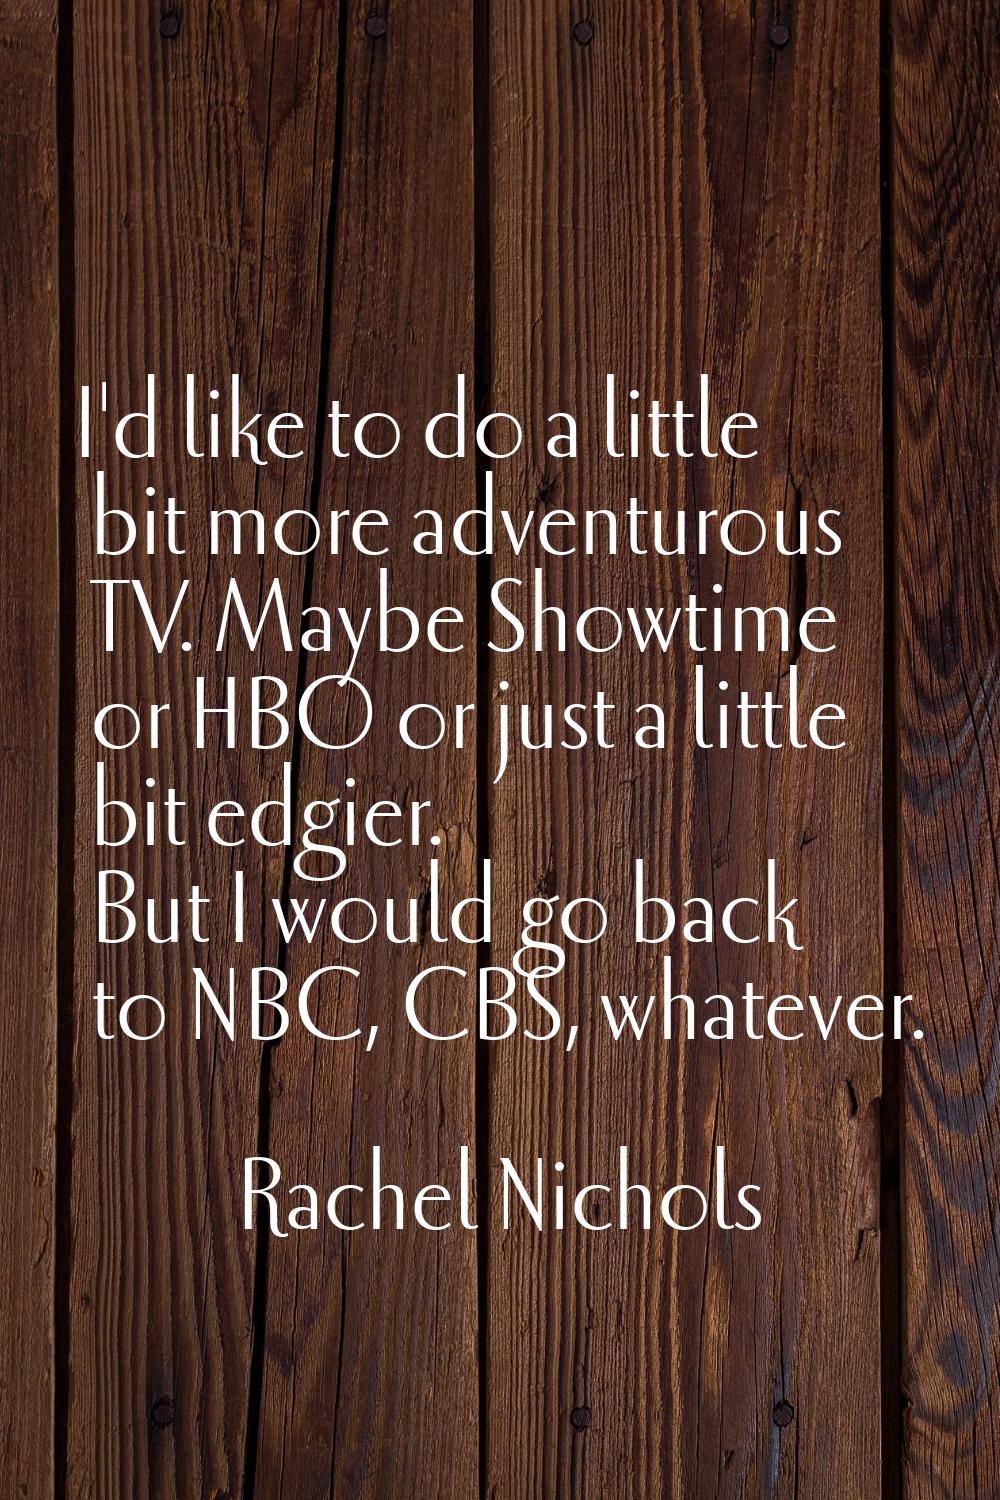 I'd like to do a little bit more adventurous TV. Maybe Showtime or HBO or just a little bit edgier.